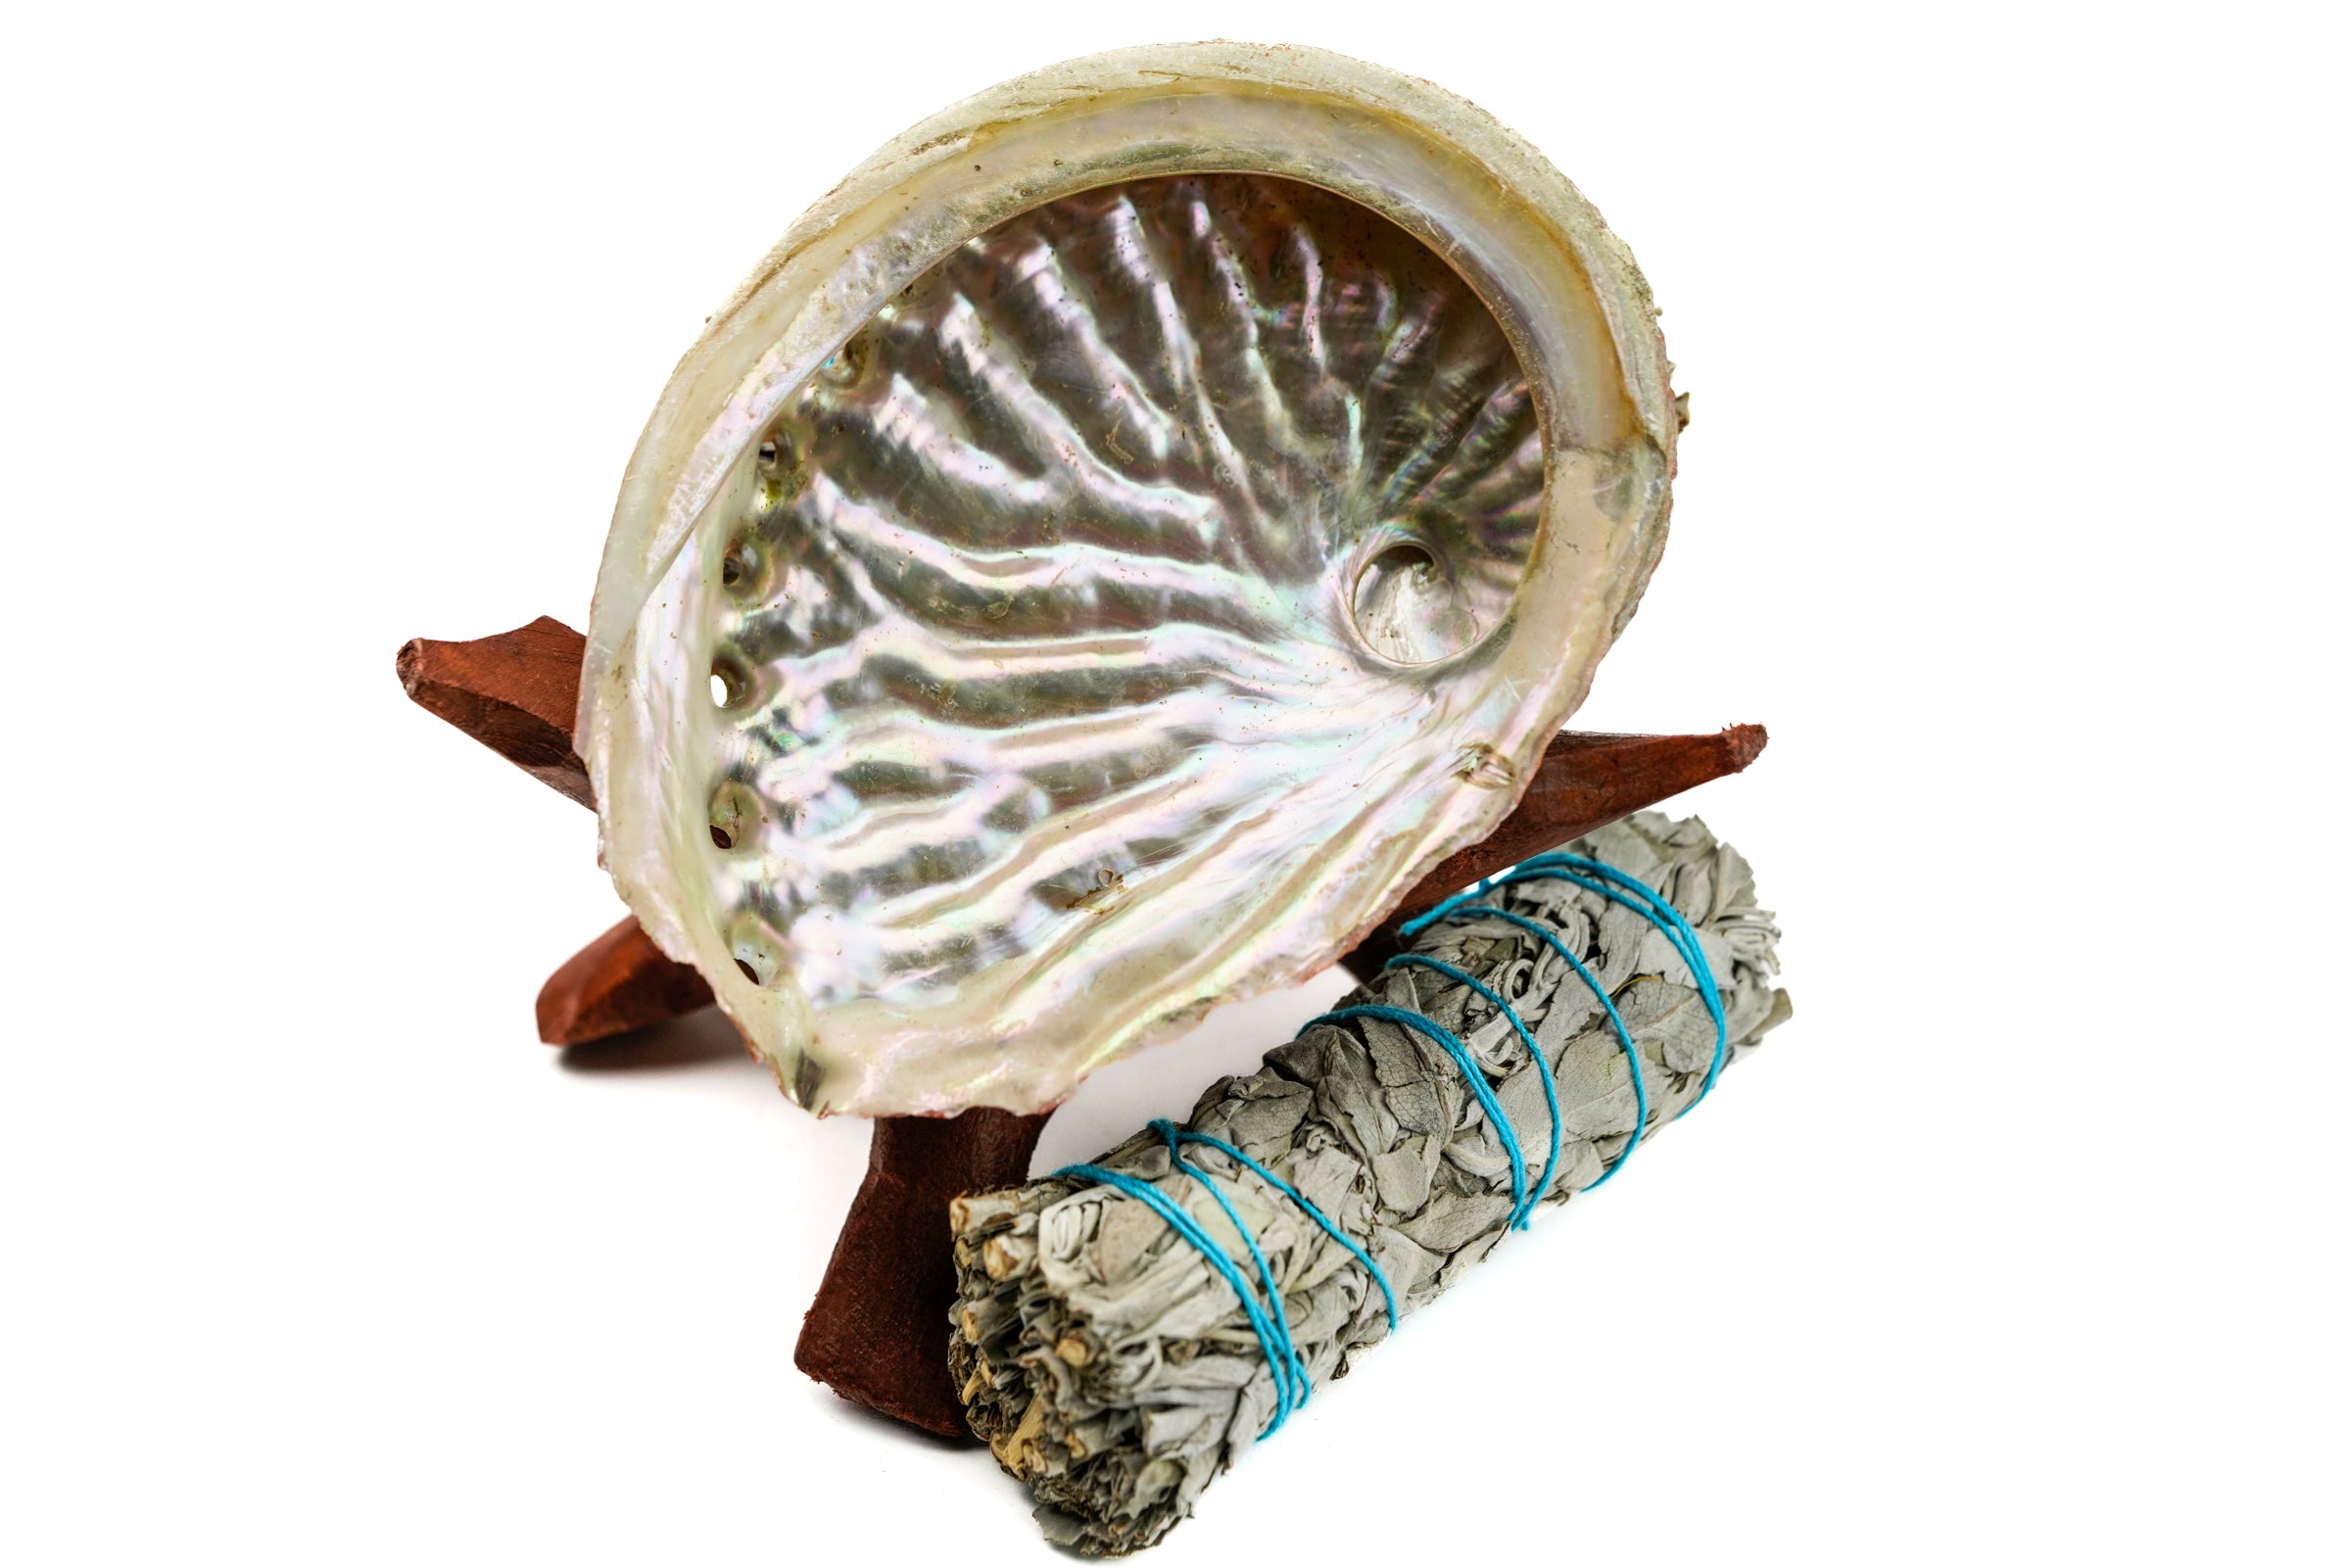 Smudge Kit - Includes: Large Abalone Shell, White Sage Stick, 7in Wood Tripod